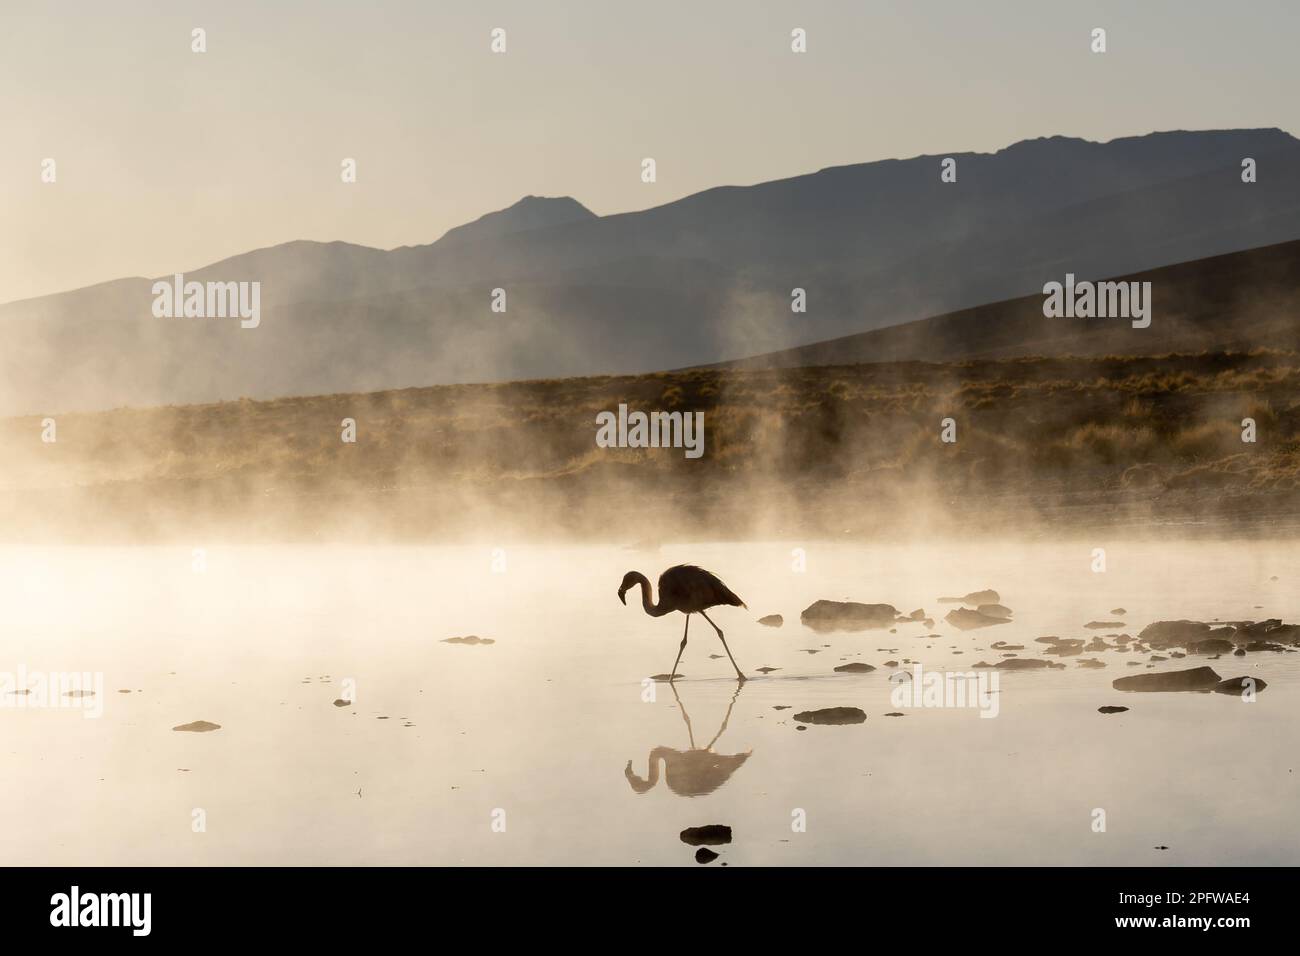 A flamingo standing in the shallow water with mountains and morning fog in the background at the hot springs of Termas de Polques, Boliva. Stock Photo